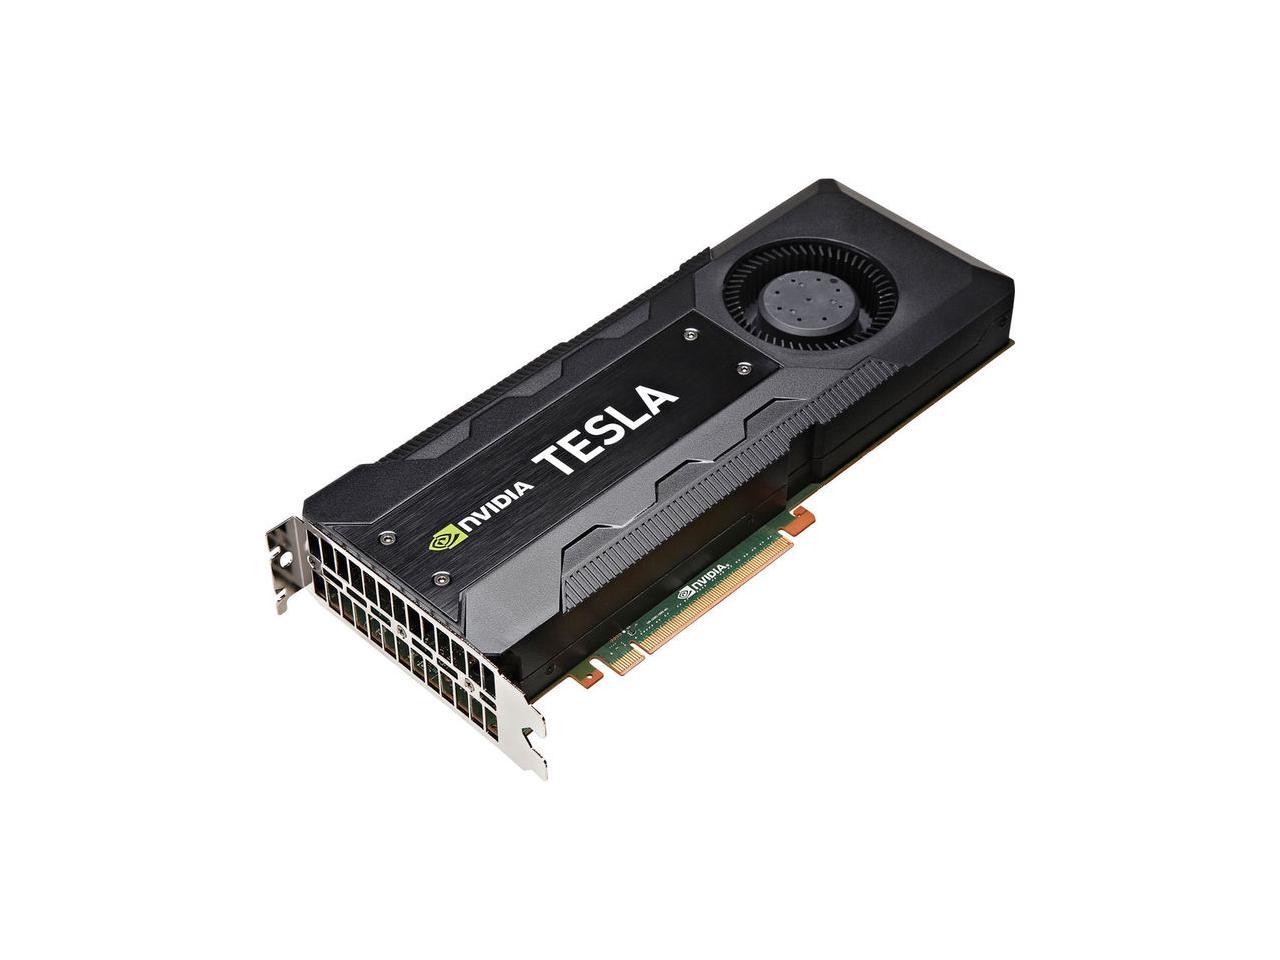 Refurbished NVIDIA Tesla K40 Graphic Card - 1GPUs - 745MHz Core - 12GB GDDR5 - Full-length/Full-height - Dual Slot Space Required - 3000MHz Memory Clock - 384bit Bus Width - Passive Cooler